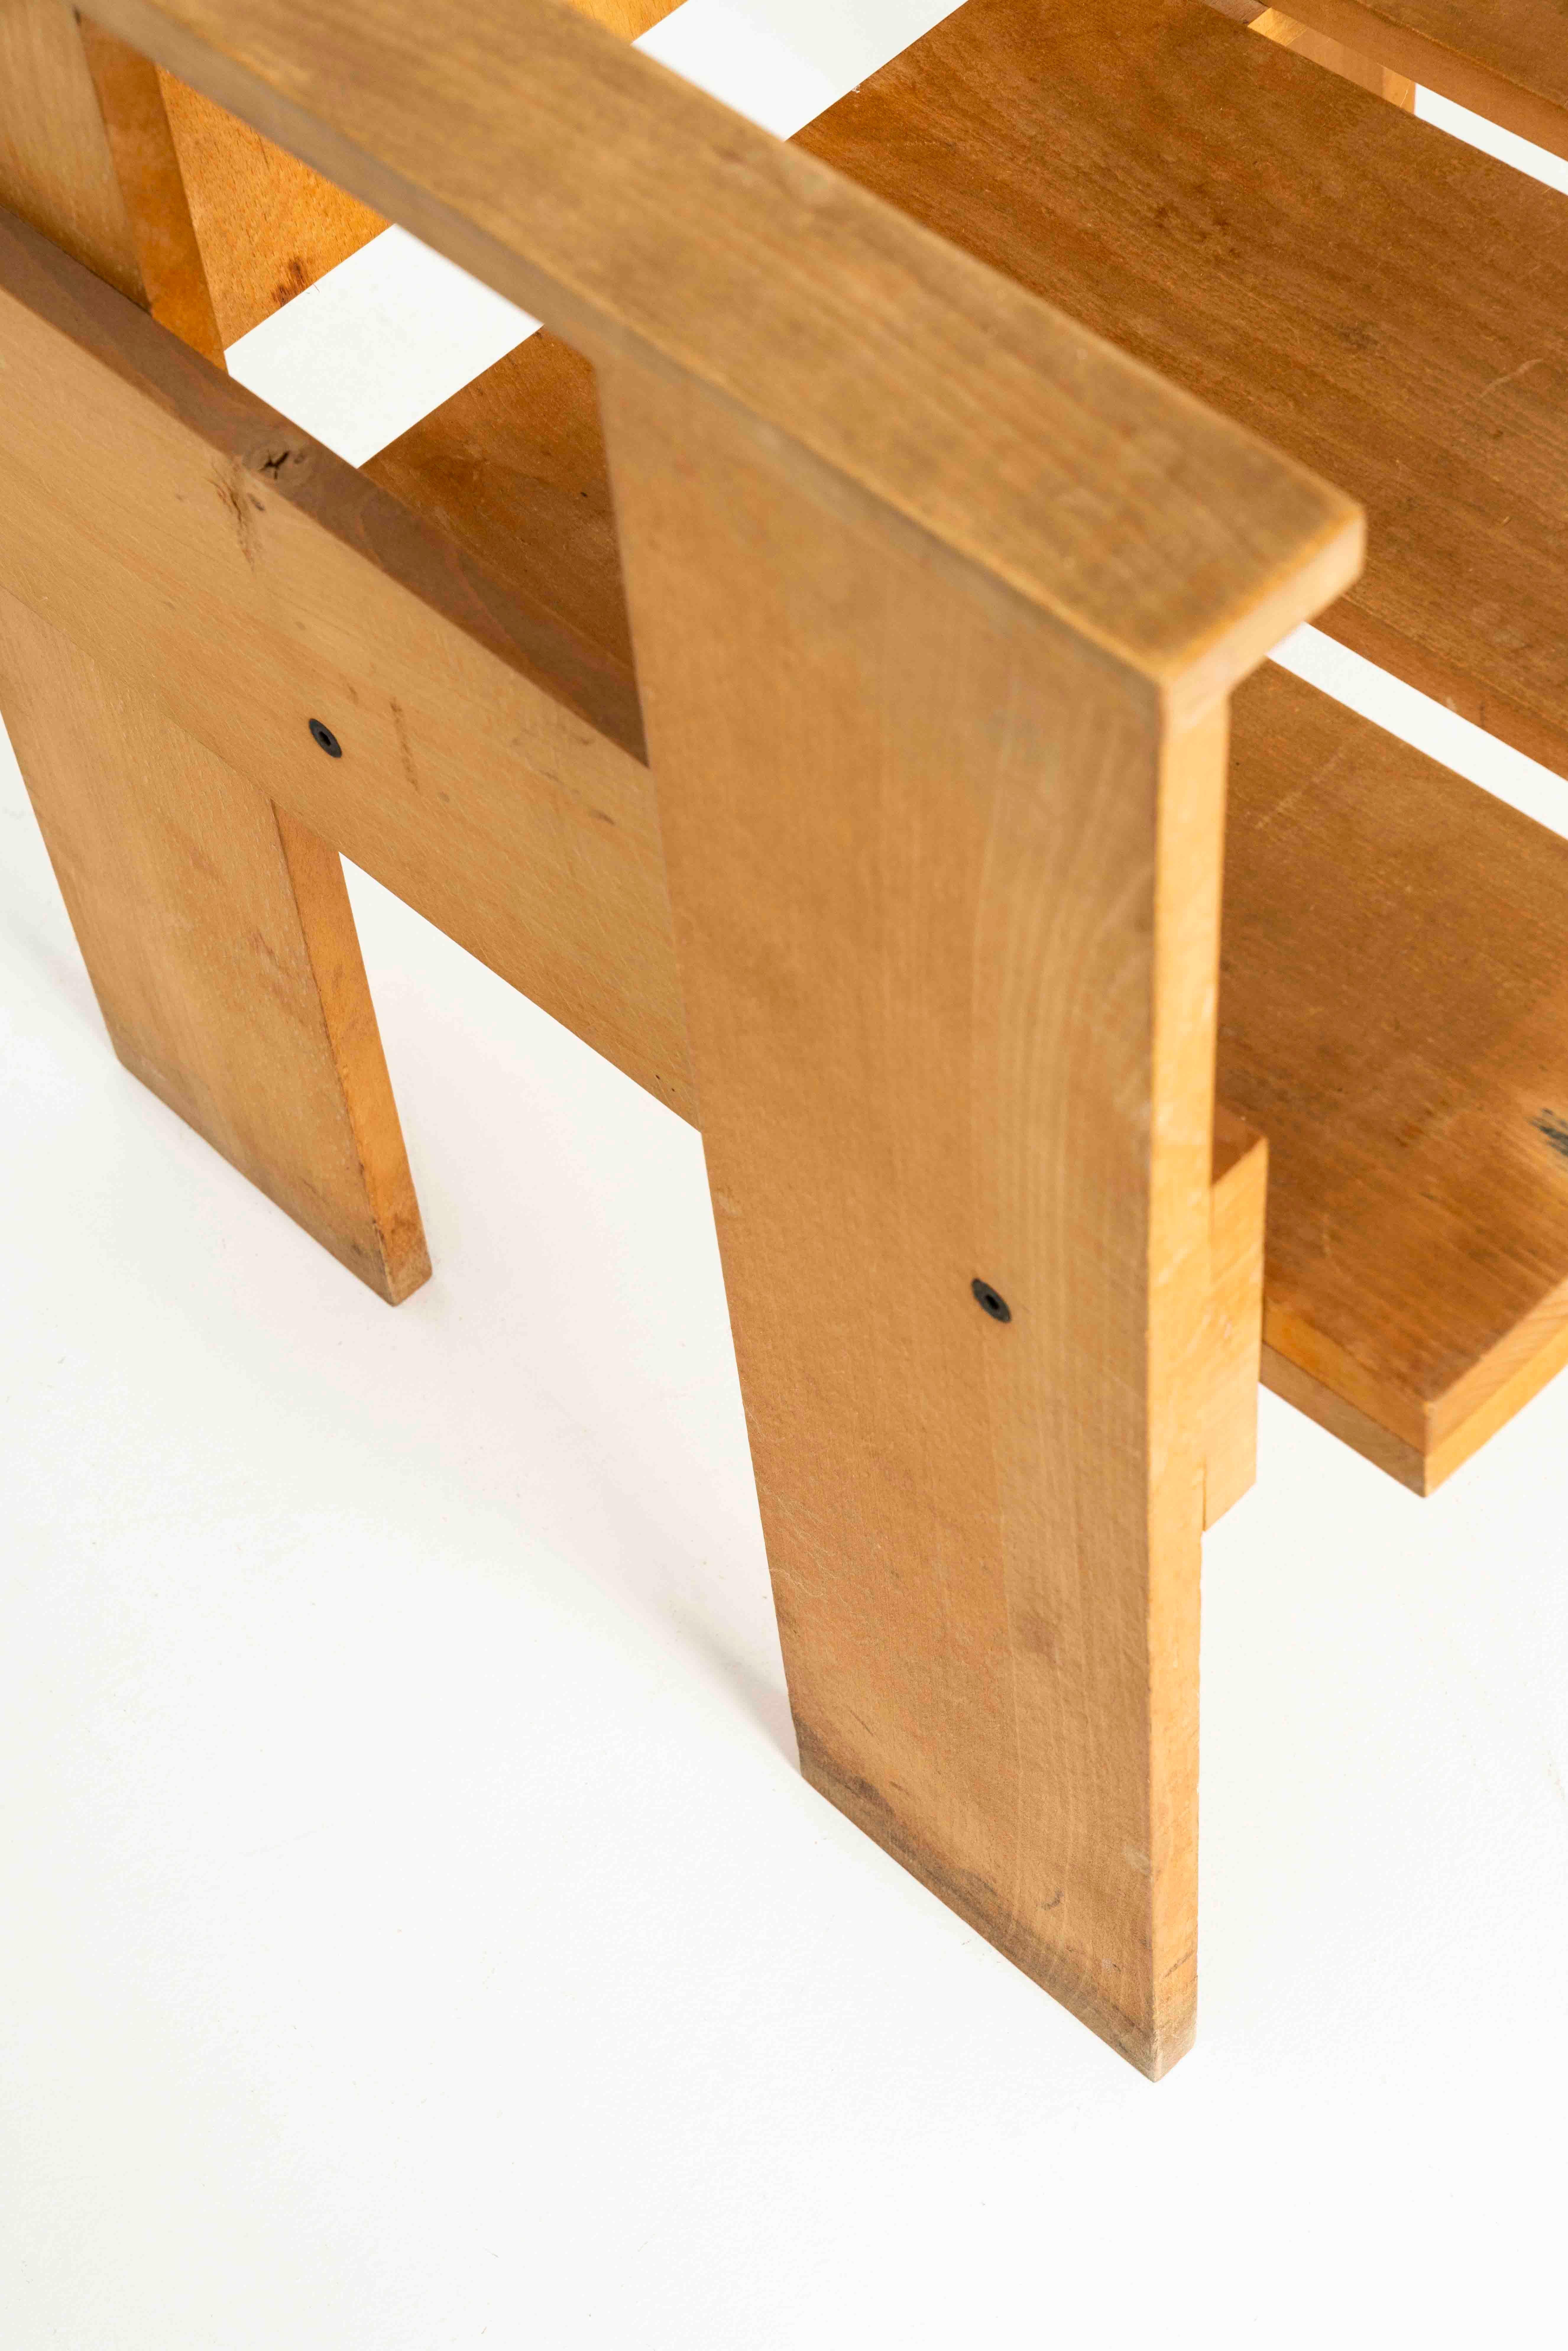 Mid-Century Modern Crate Chair by Gerrit Rietveld, Designed in 1930s The Netherlands For Sale